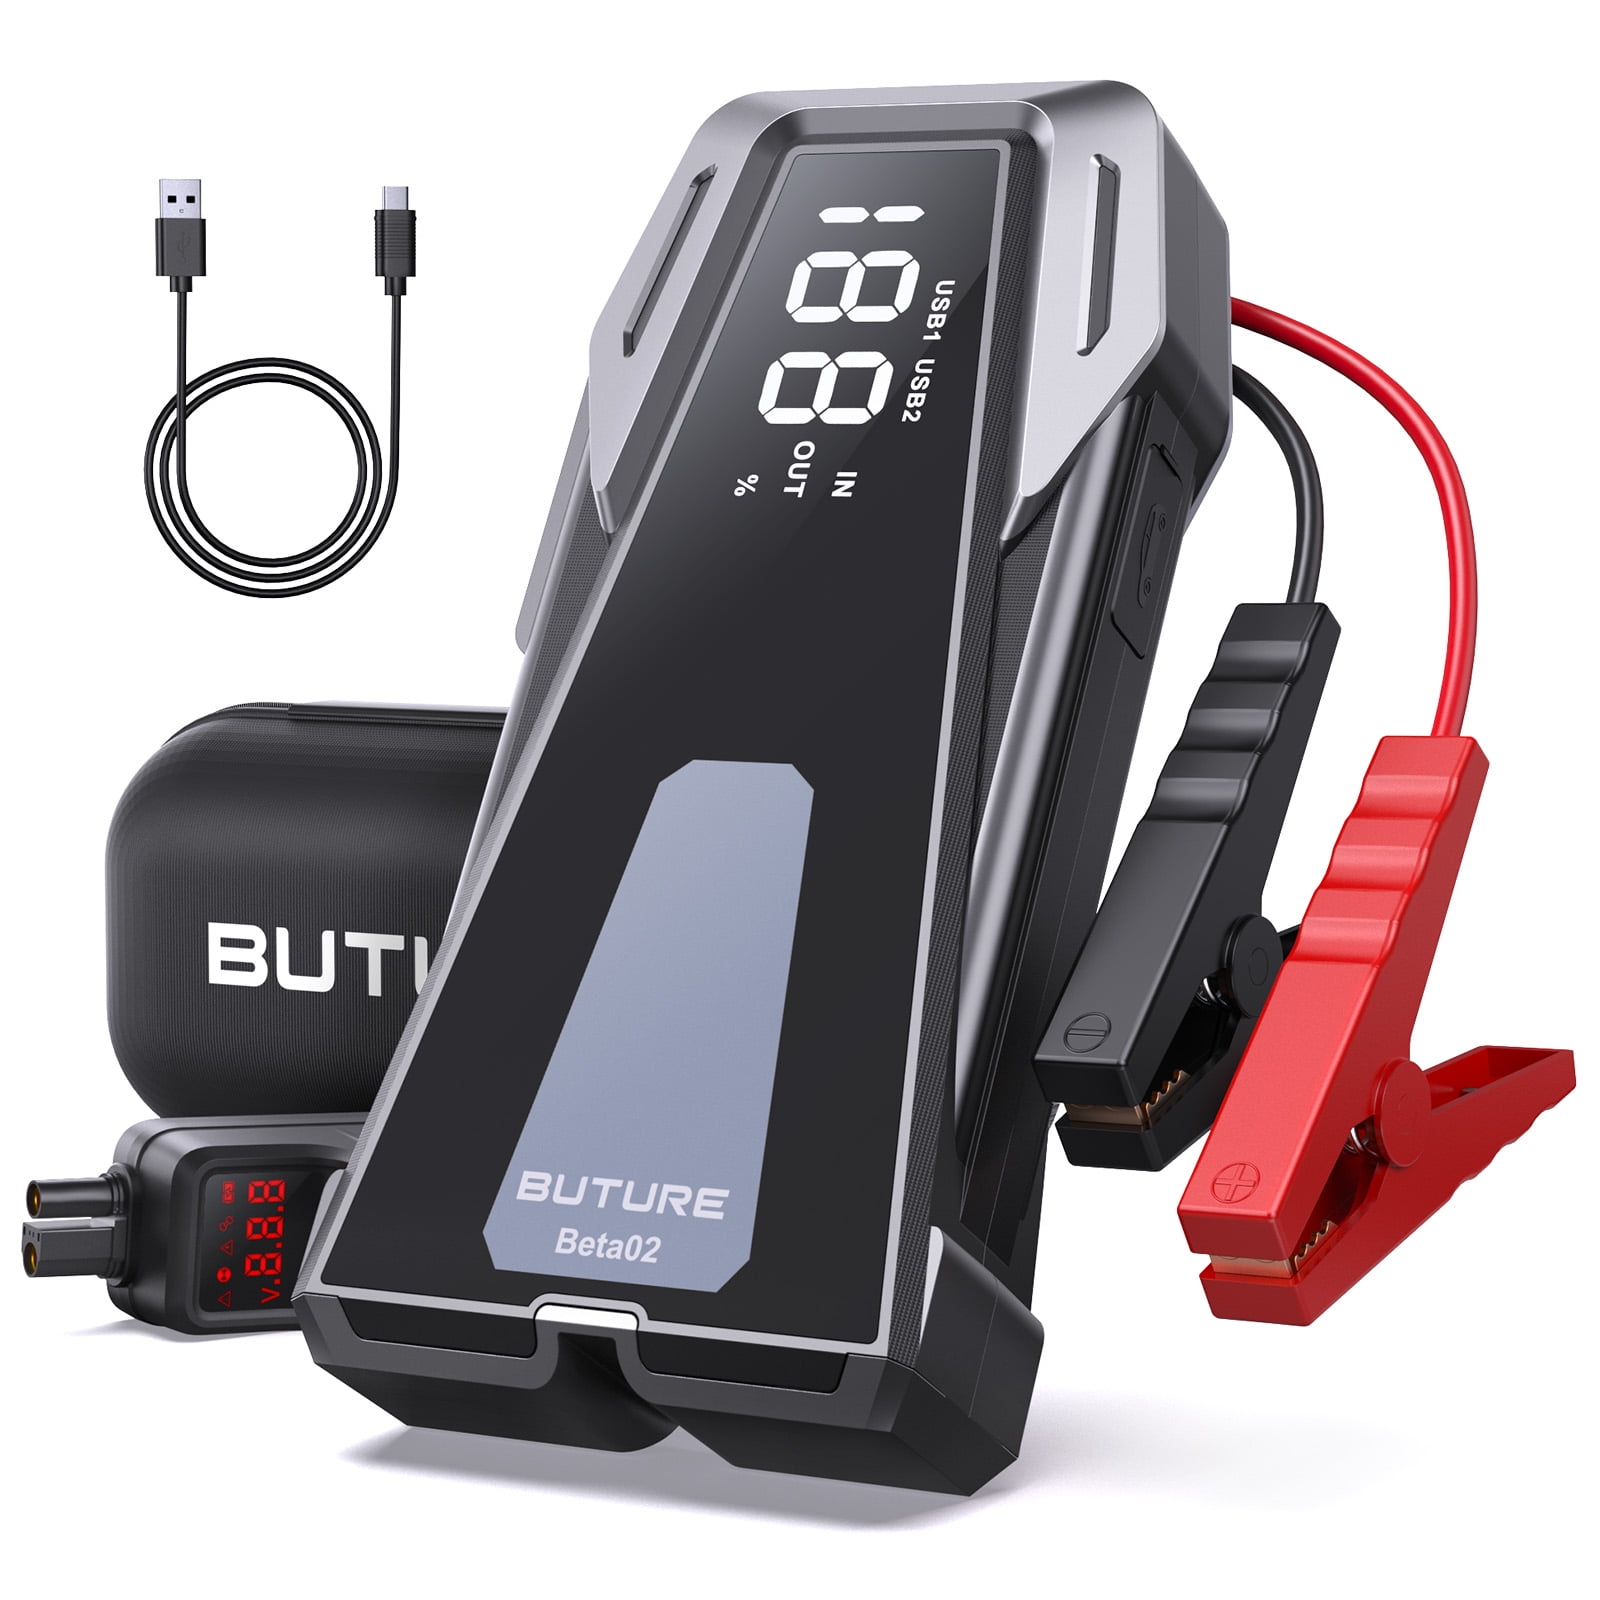 BuTure Car Jump Starter Booster 2500A Powerful Safe Portable Car Battery Jump Starter Charger with Large Display Lighting Charging Function, 2500A